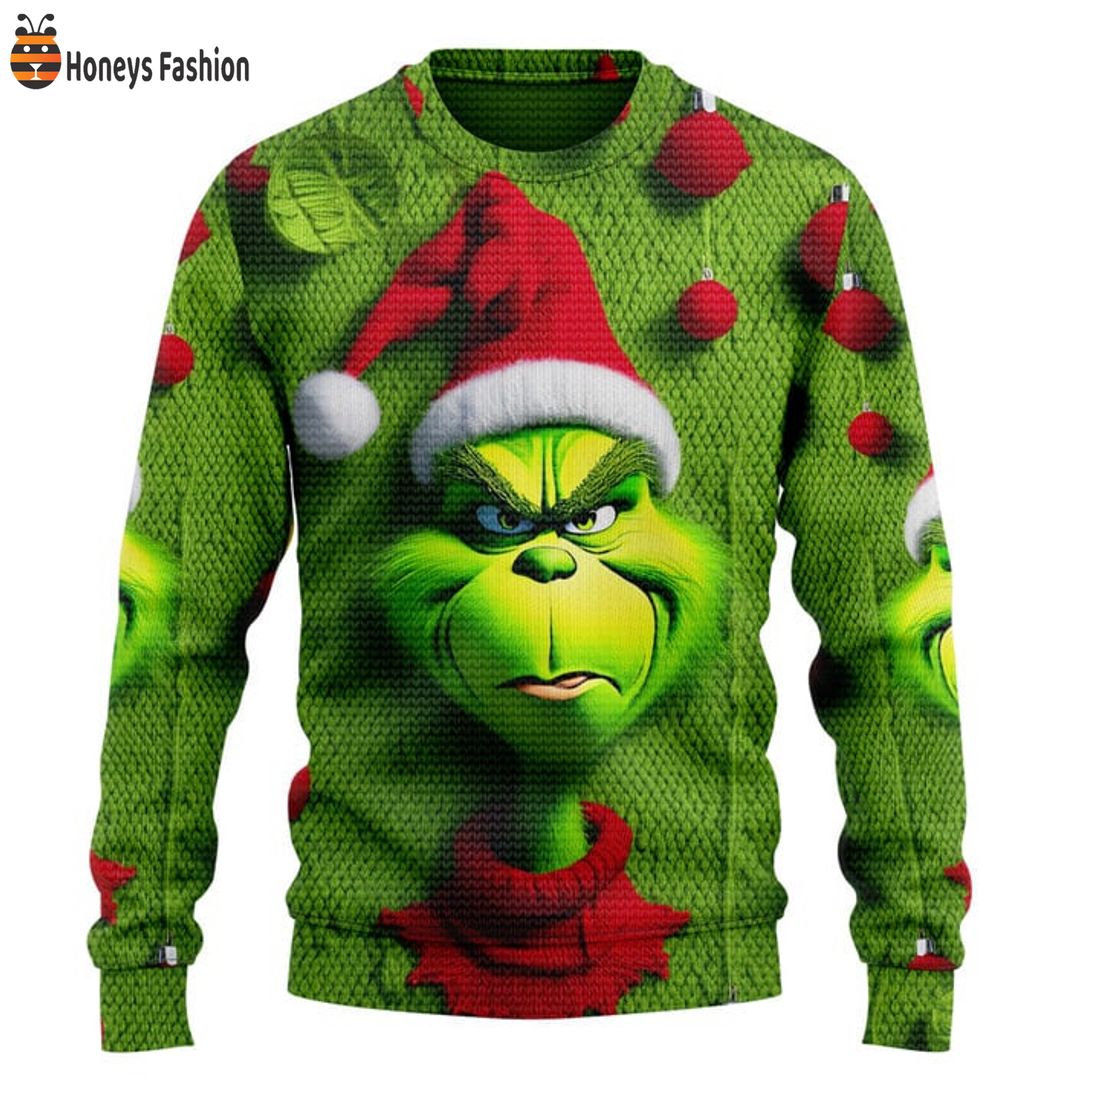 HOT The Grinch Mad Santa Hat Woolen Ugly Christmas Sweater